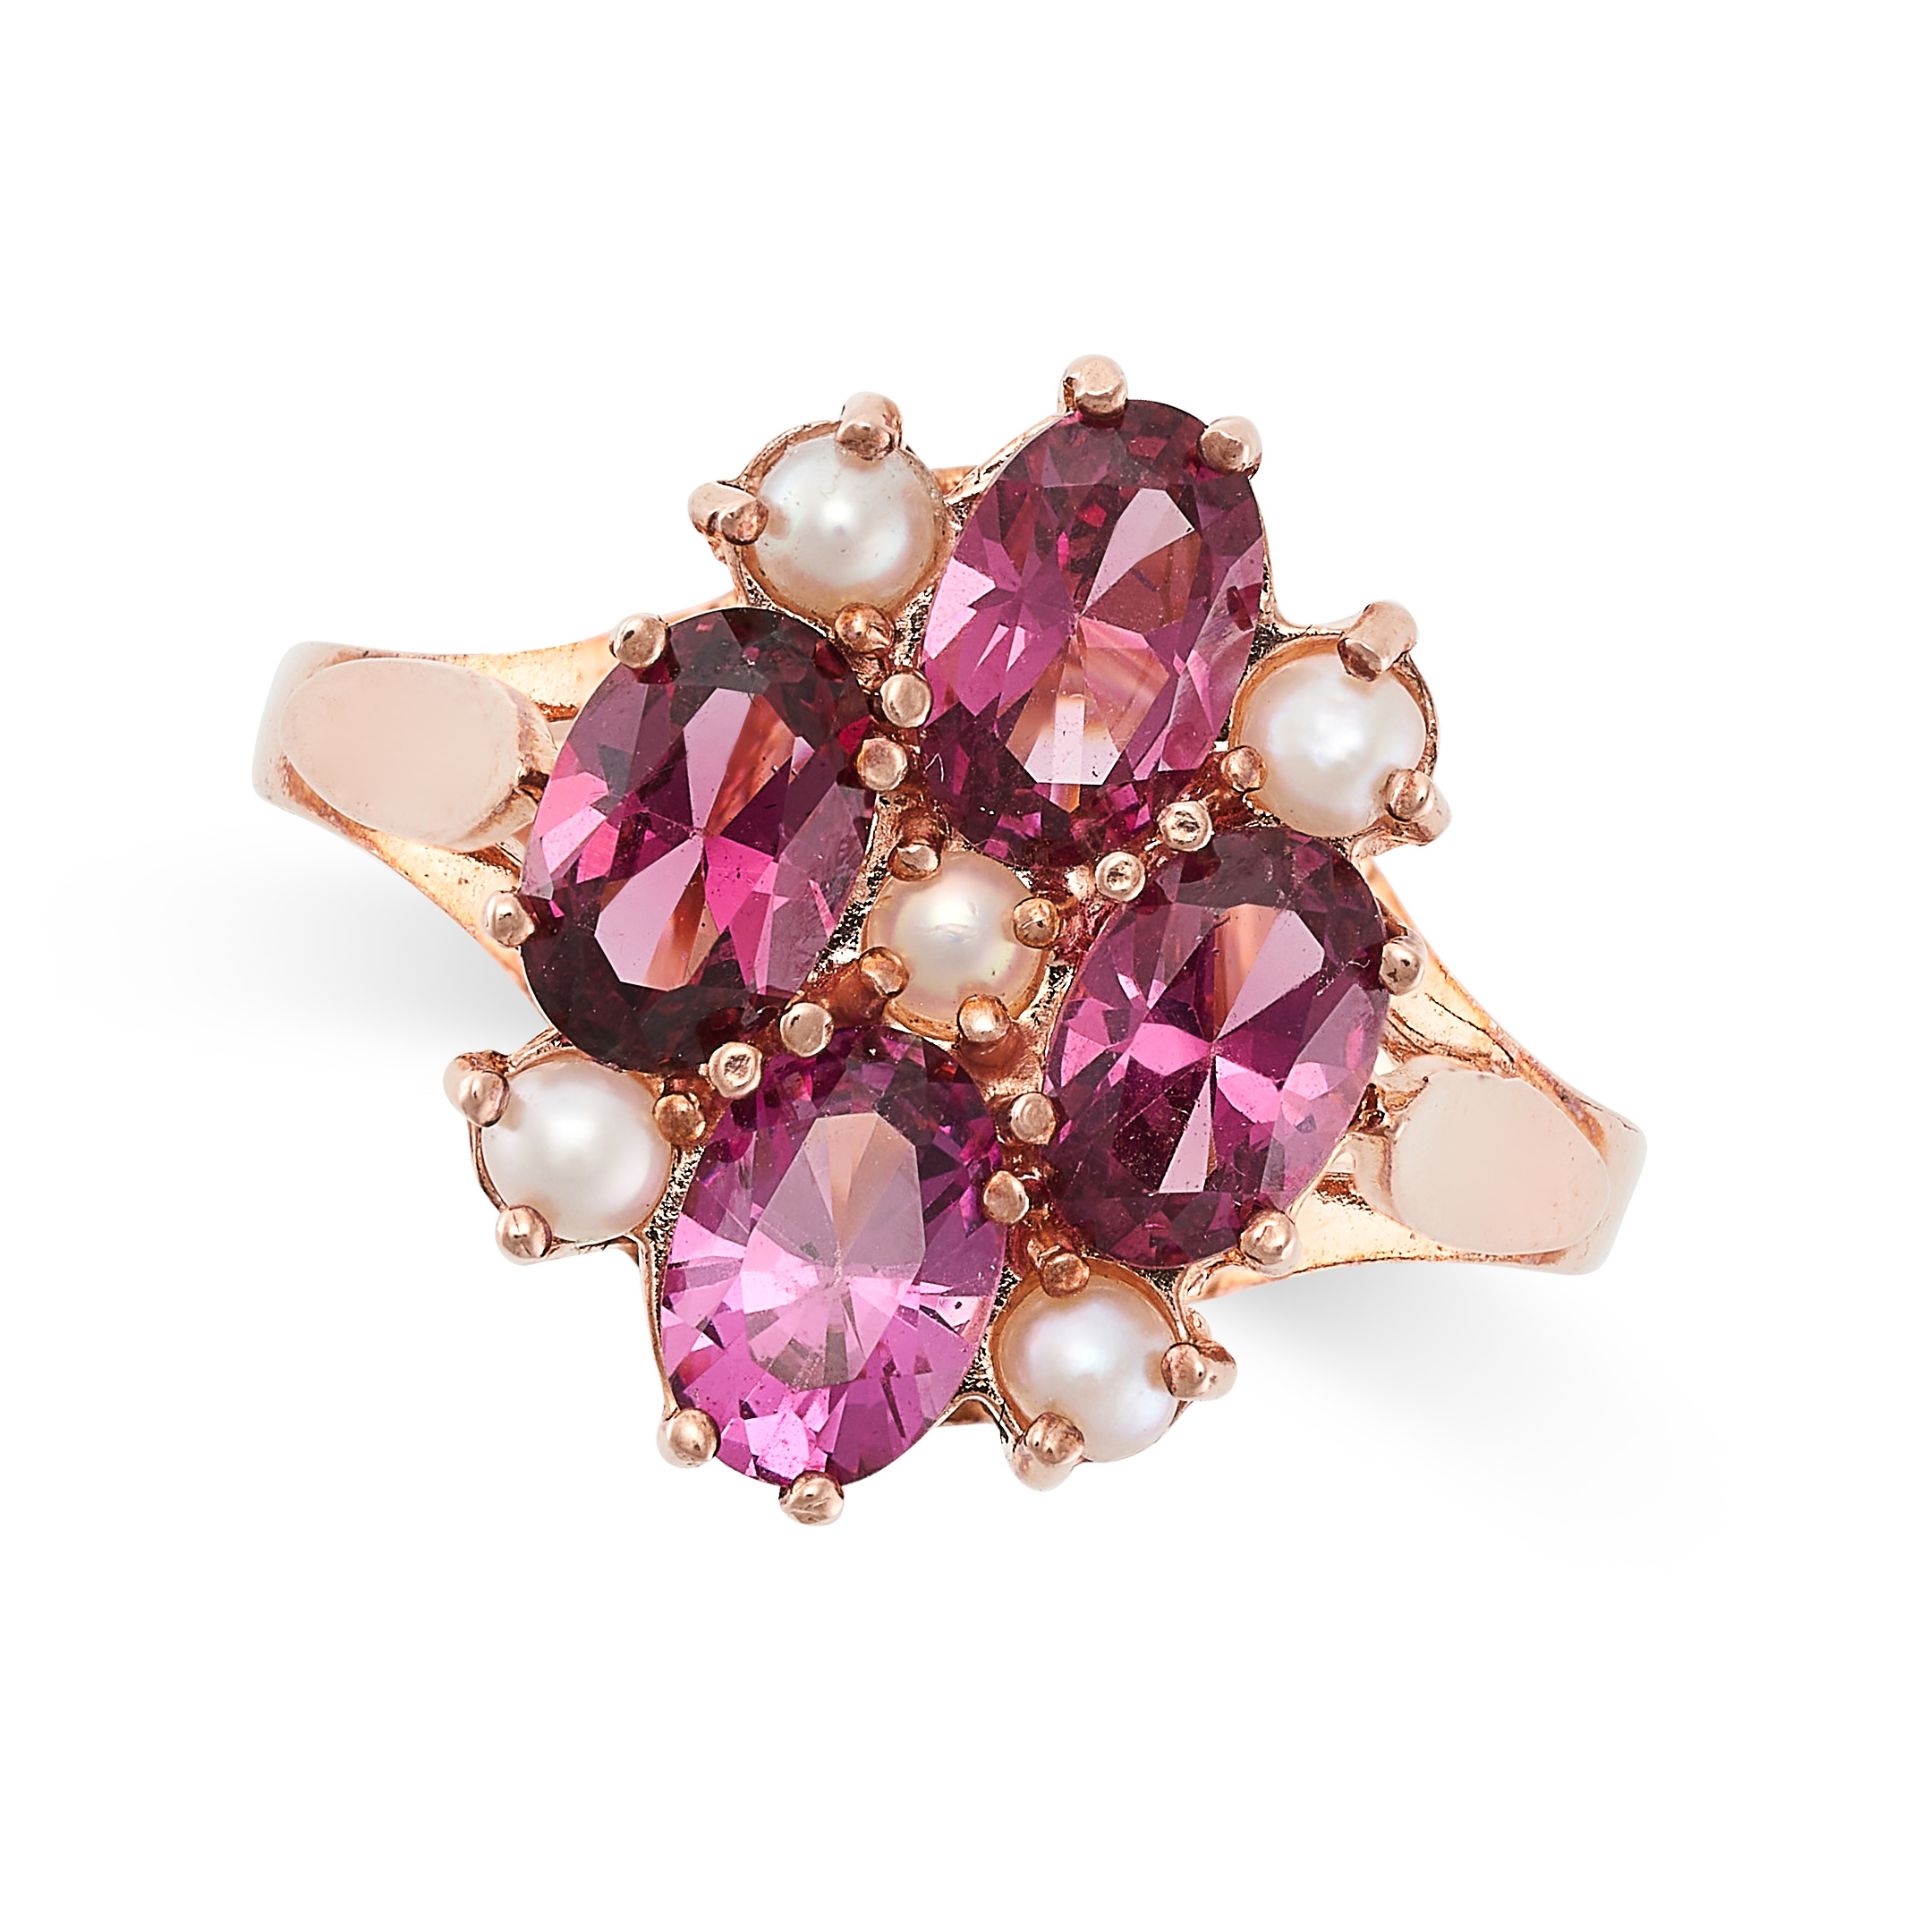 A GARNET AND PEARL RING in 9ct rose gold, set with a cluster of oval cut garnets accented by pearls,